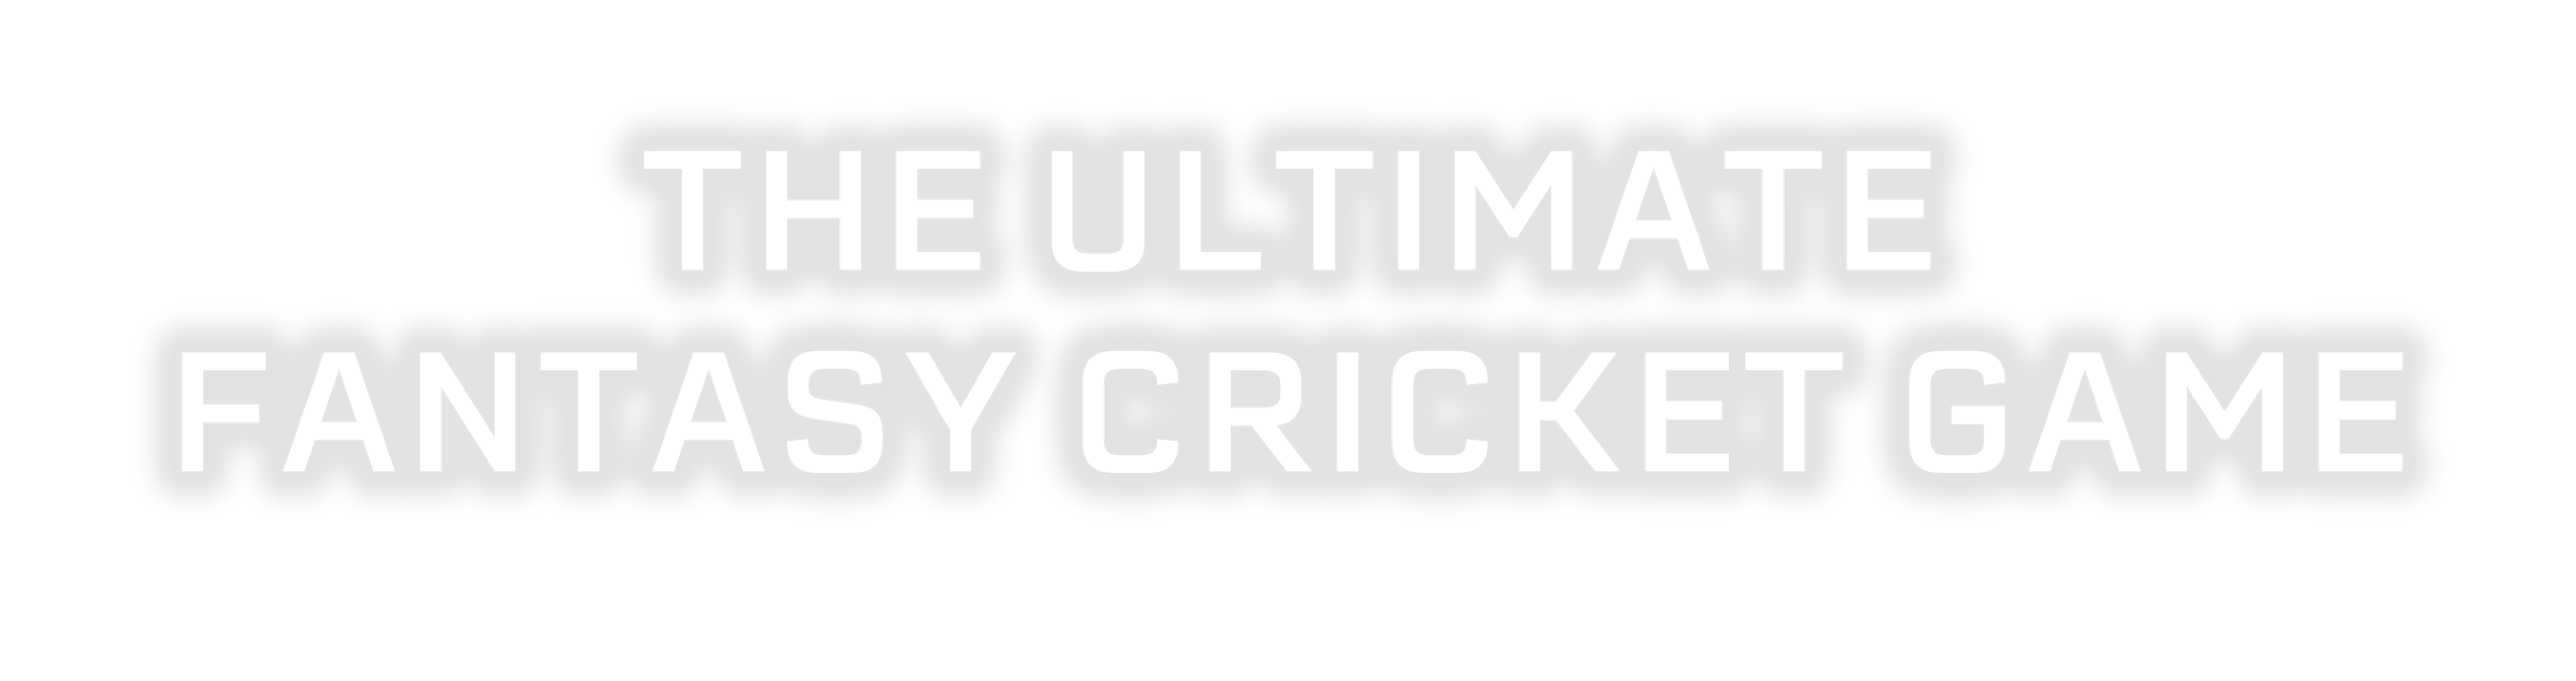 The Ultimate Fantasy Cricket Game